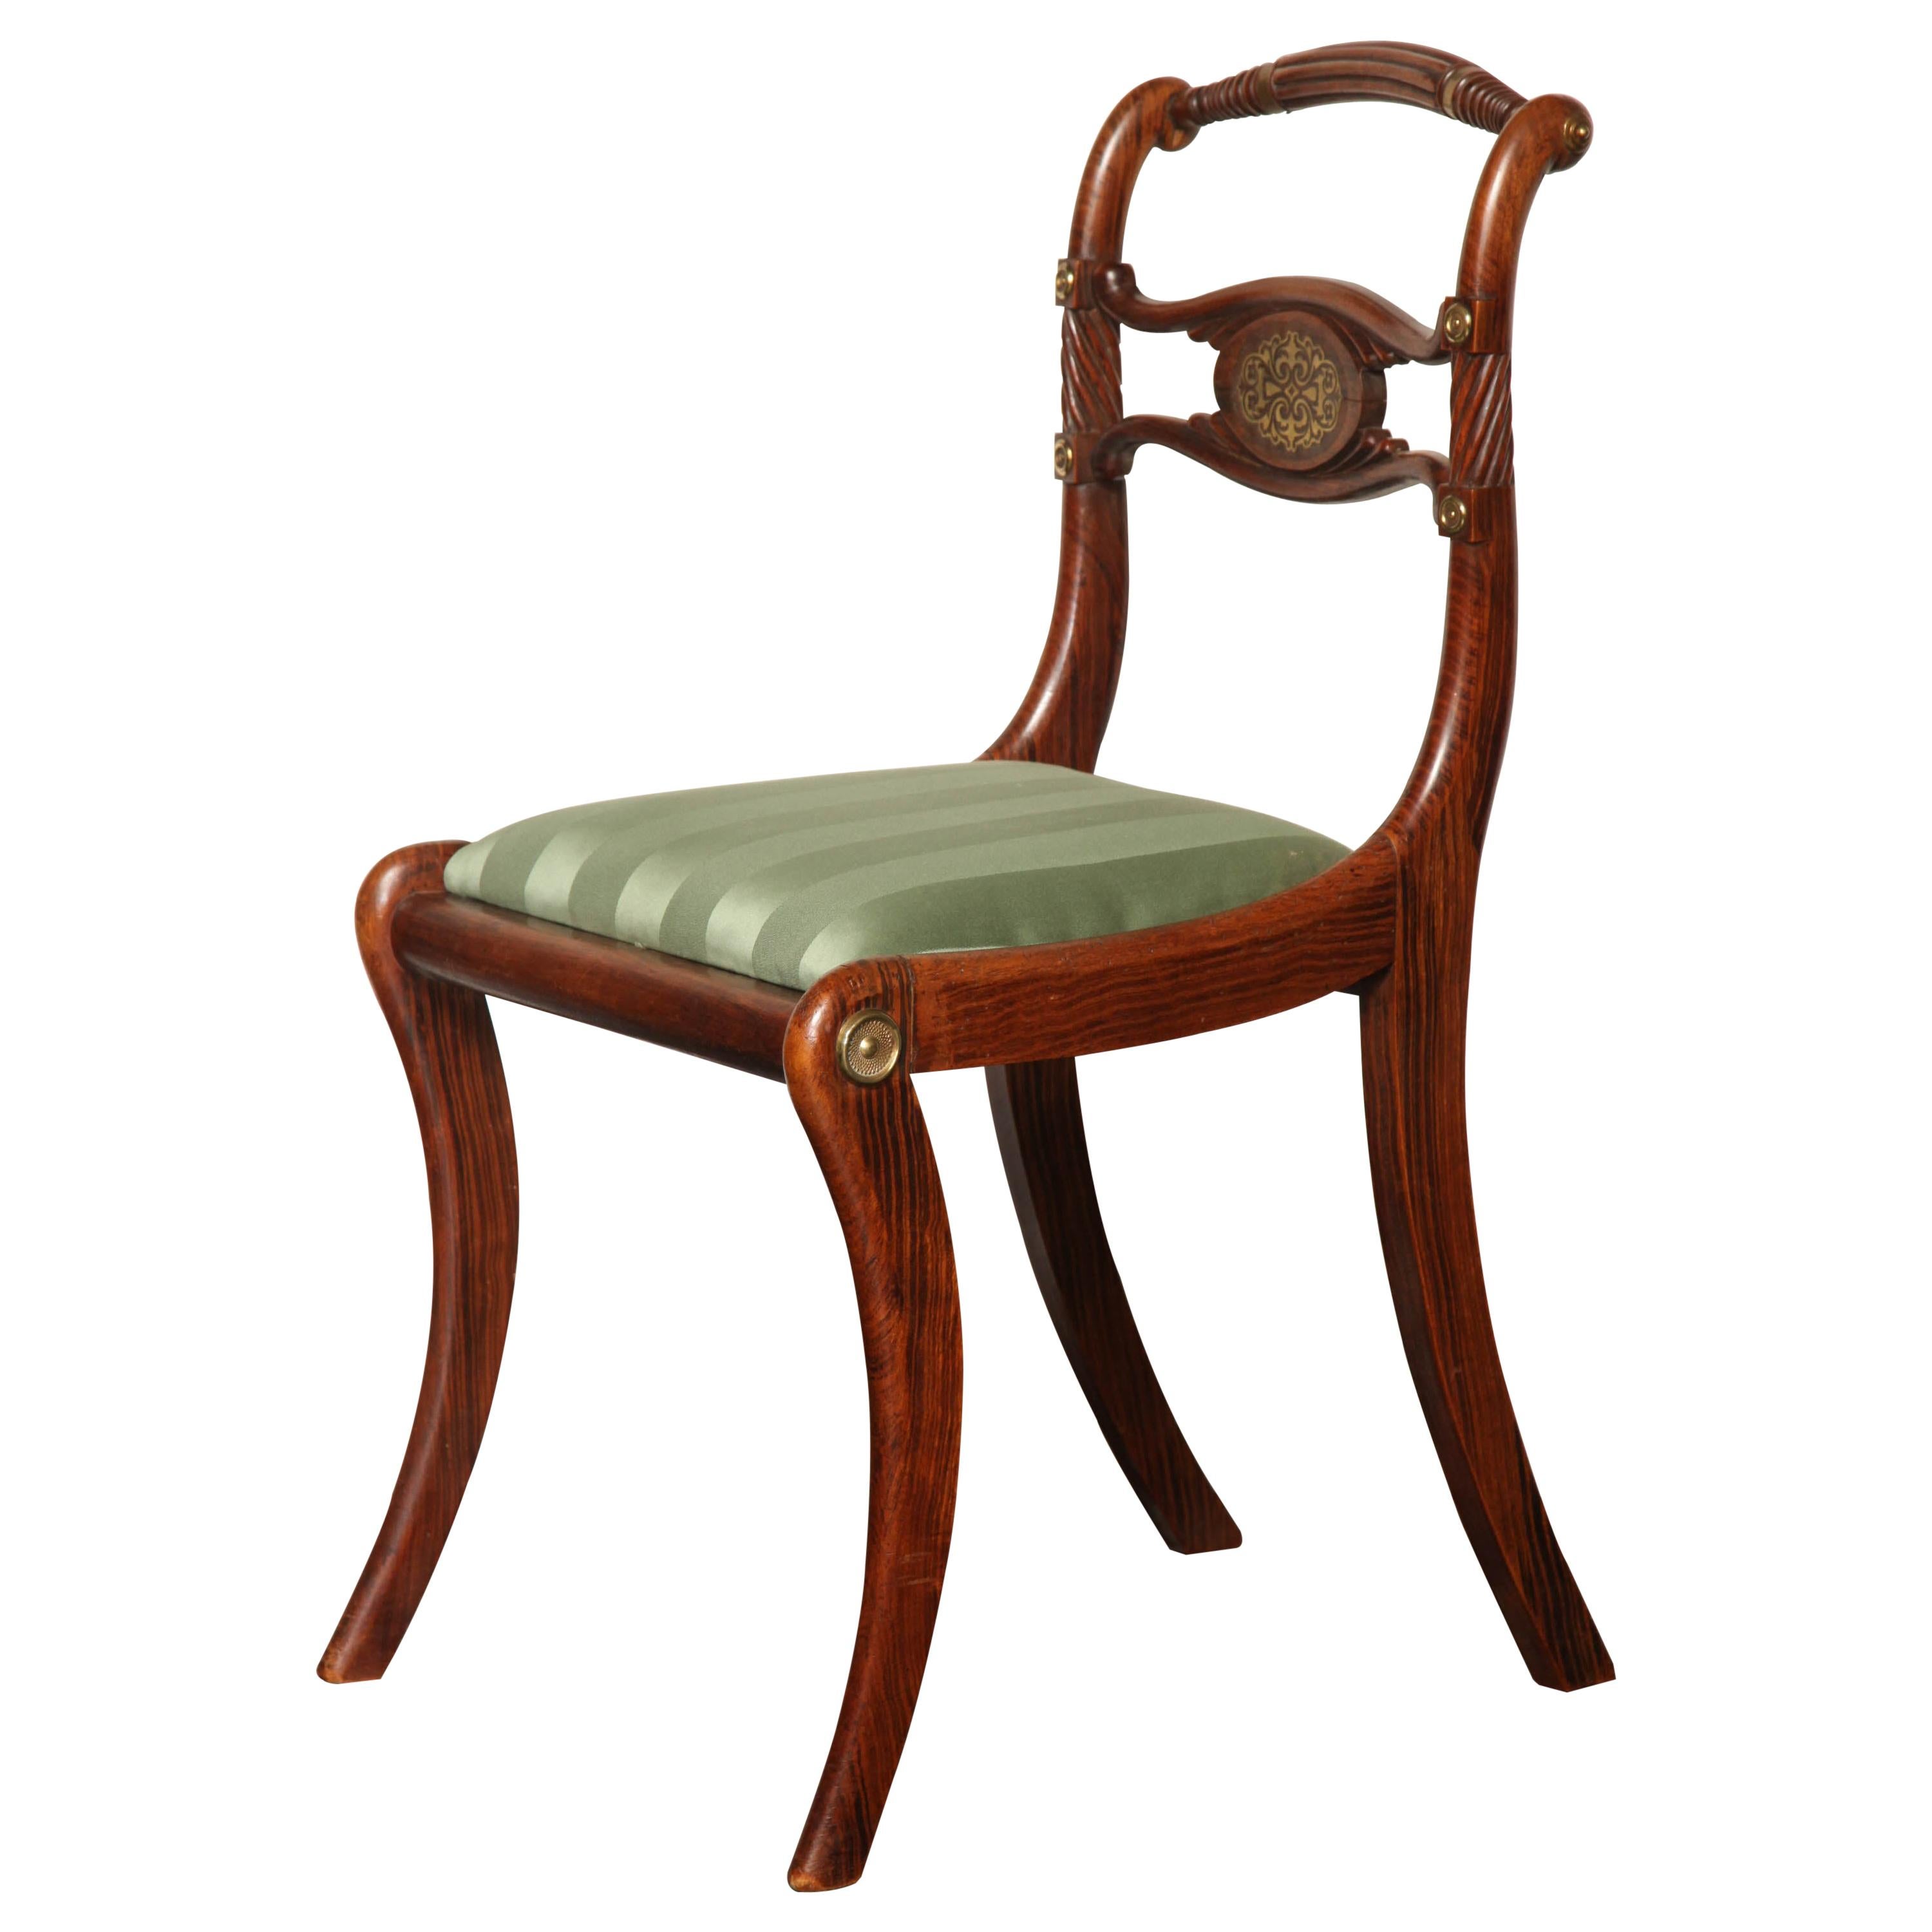  English Regency, Faux Rosewood and Brass Inlay Chair